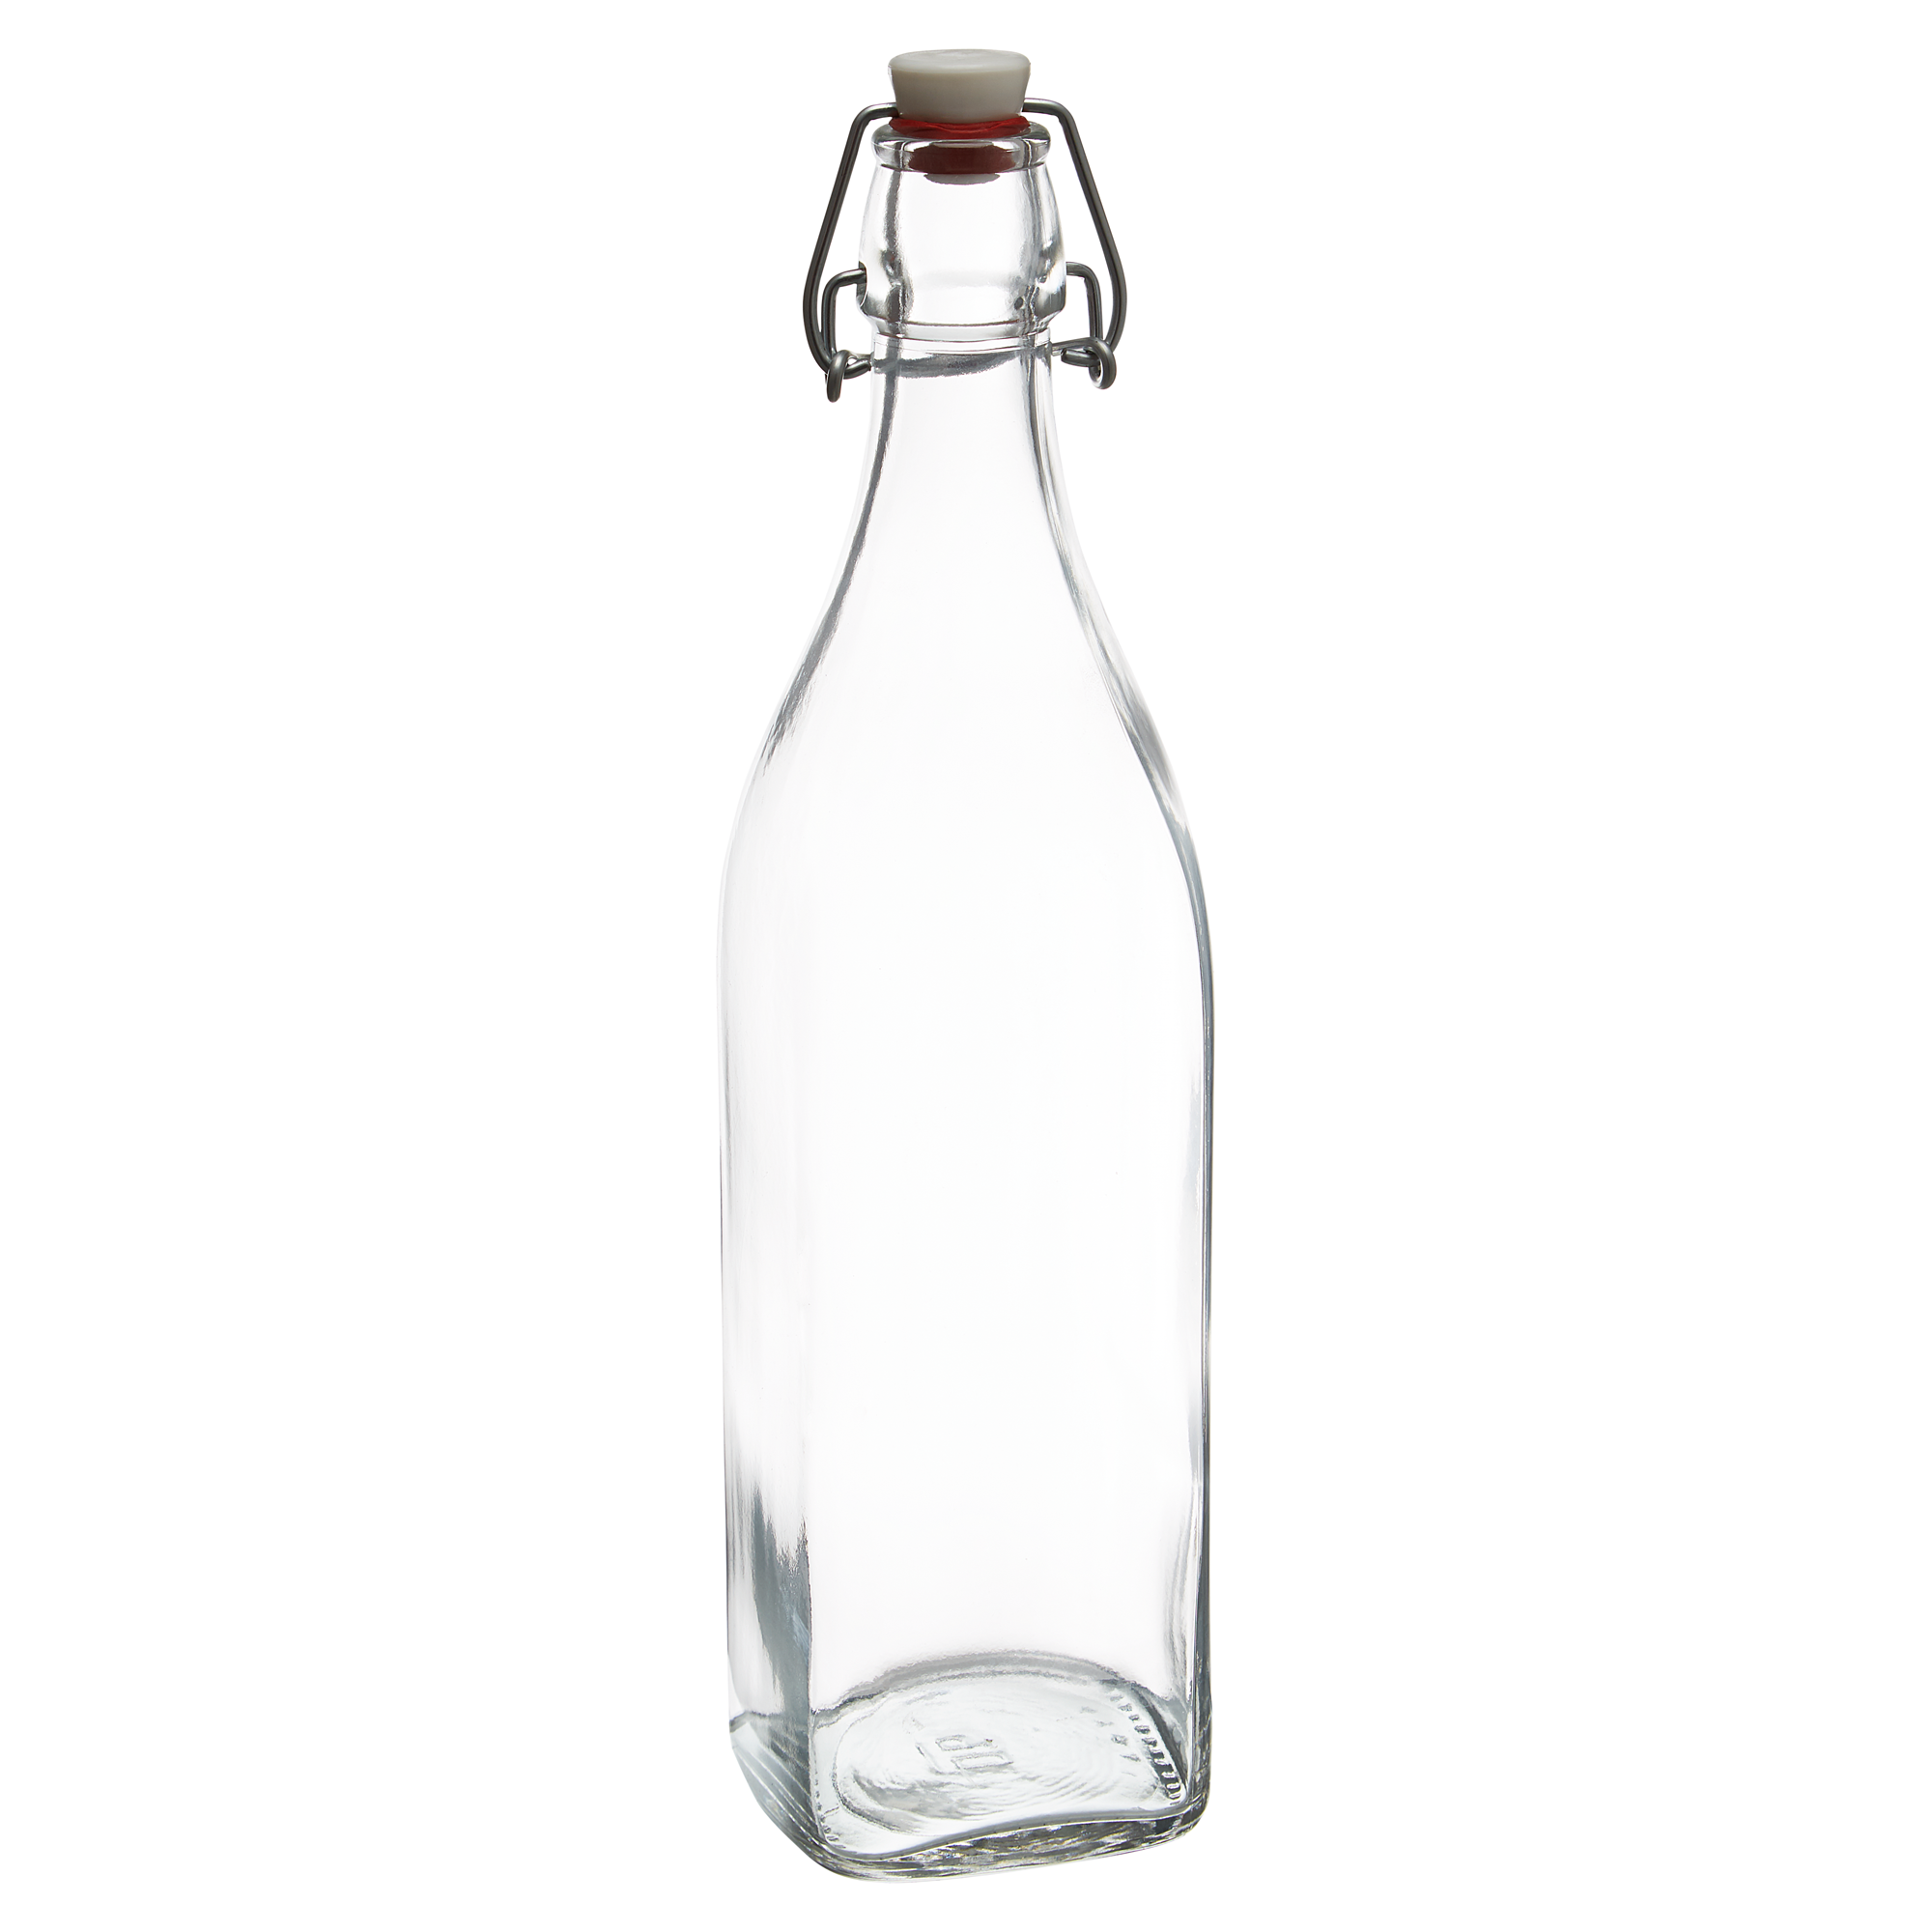 Bügelflasche "Swing" eckig 1 l + product picture